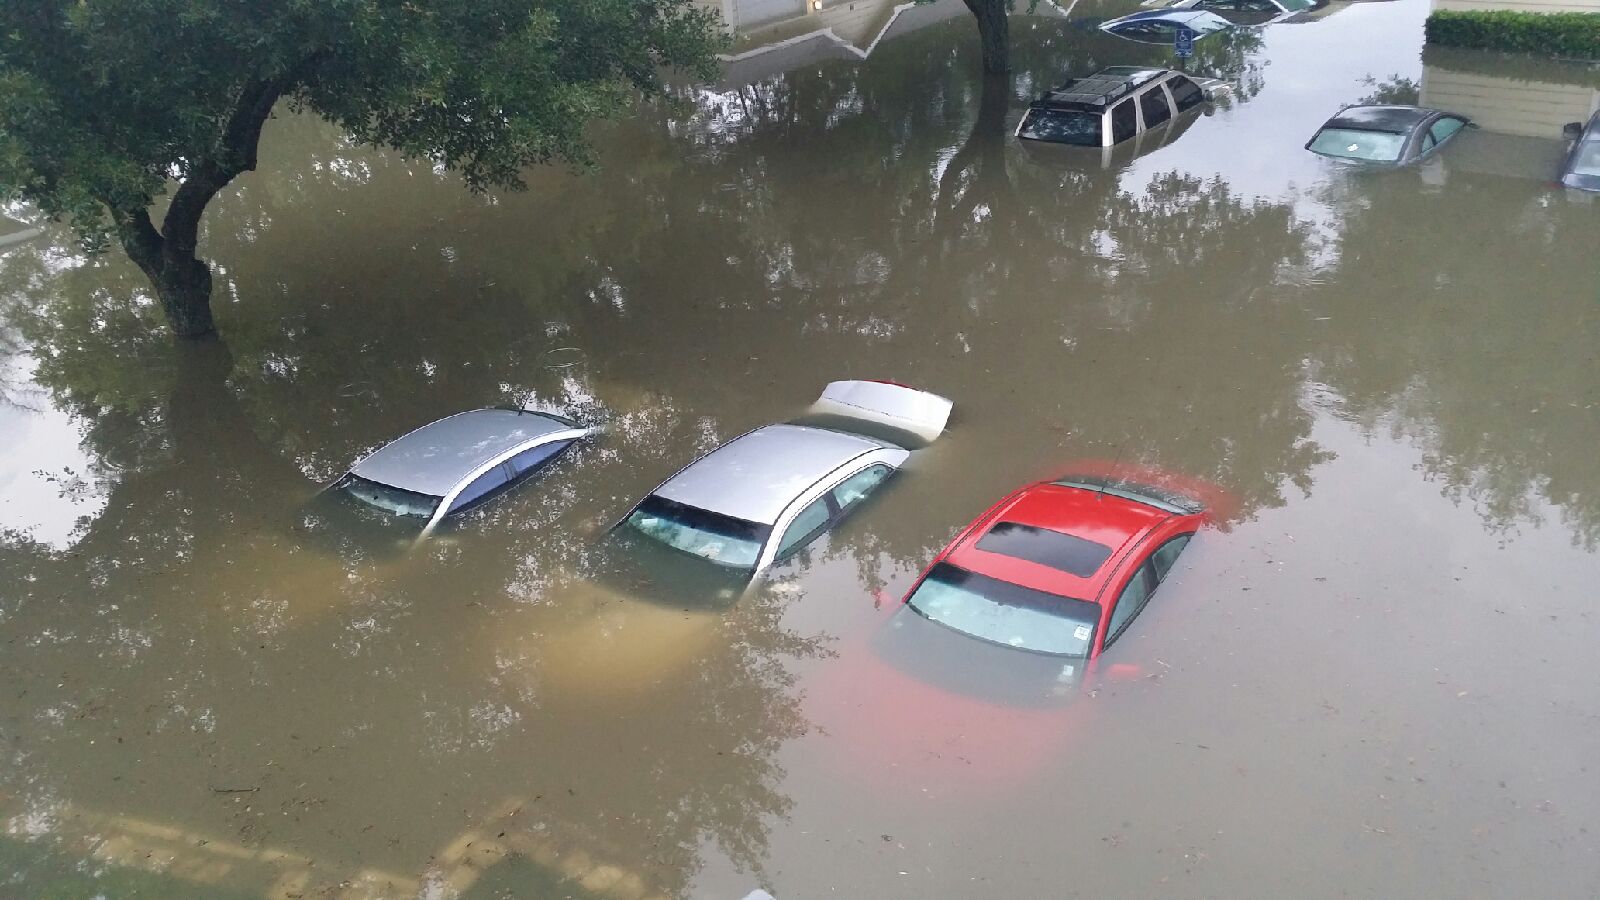 Oh wait, maybe that's a corvette. My car is flooded, now what?